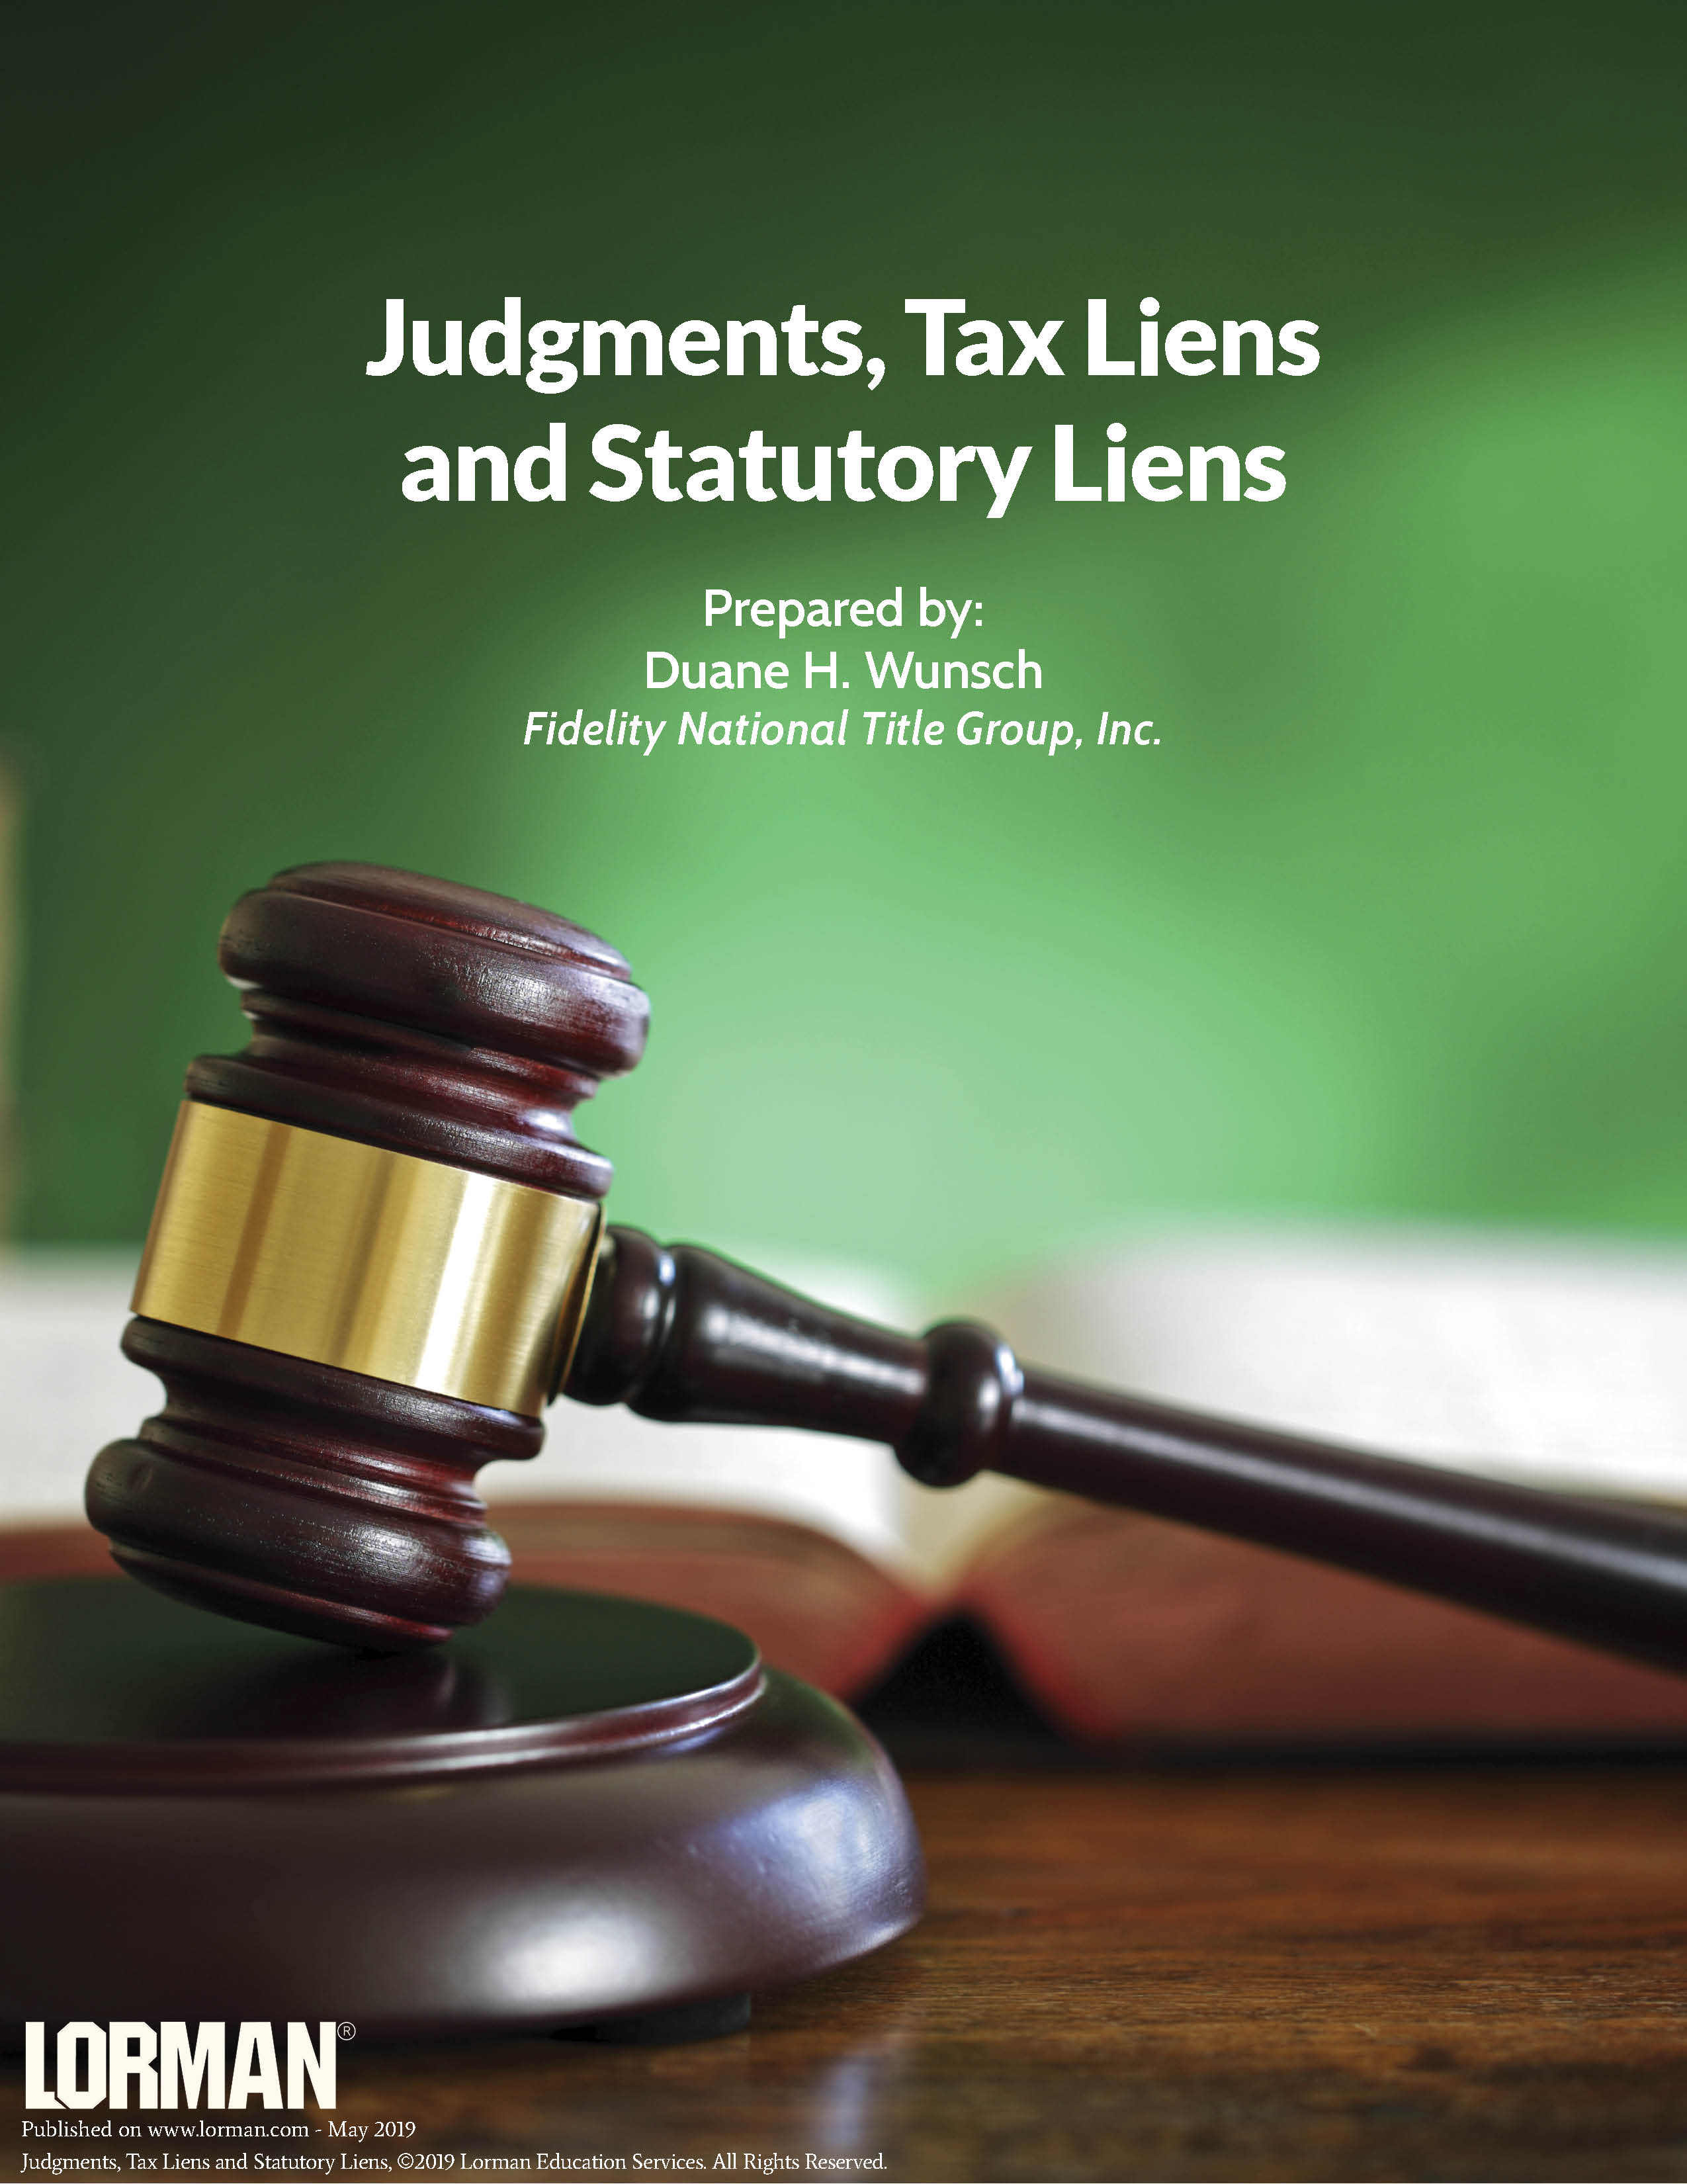 Judgments, Tax Liens and Statutory Liens